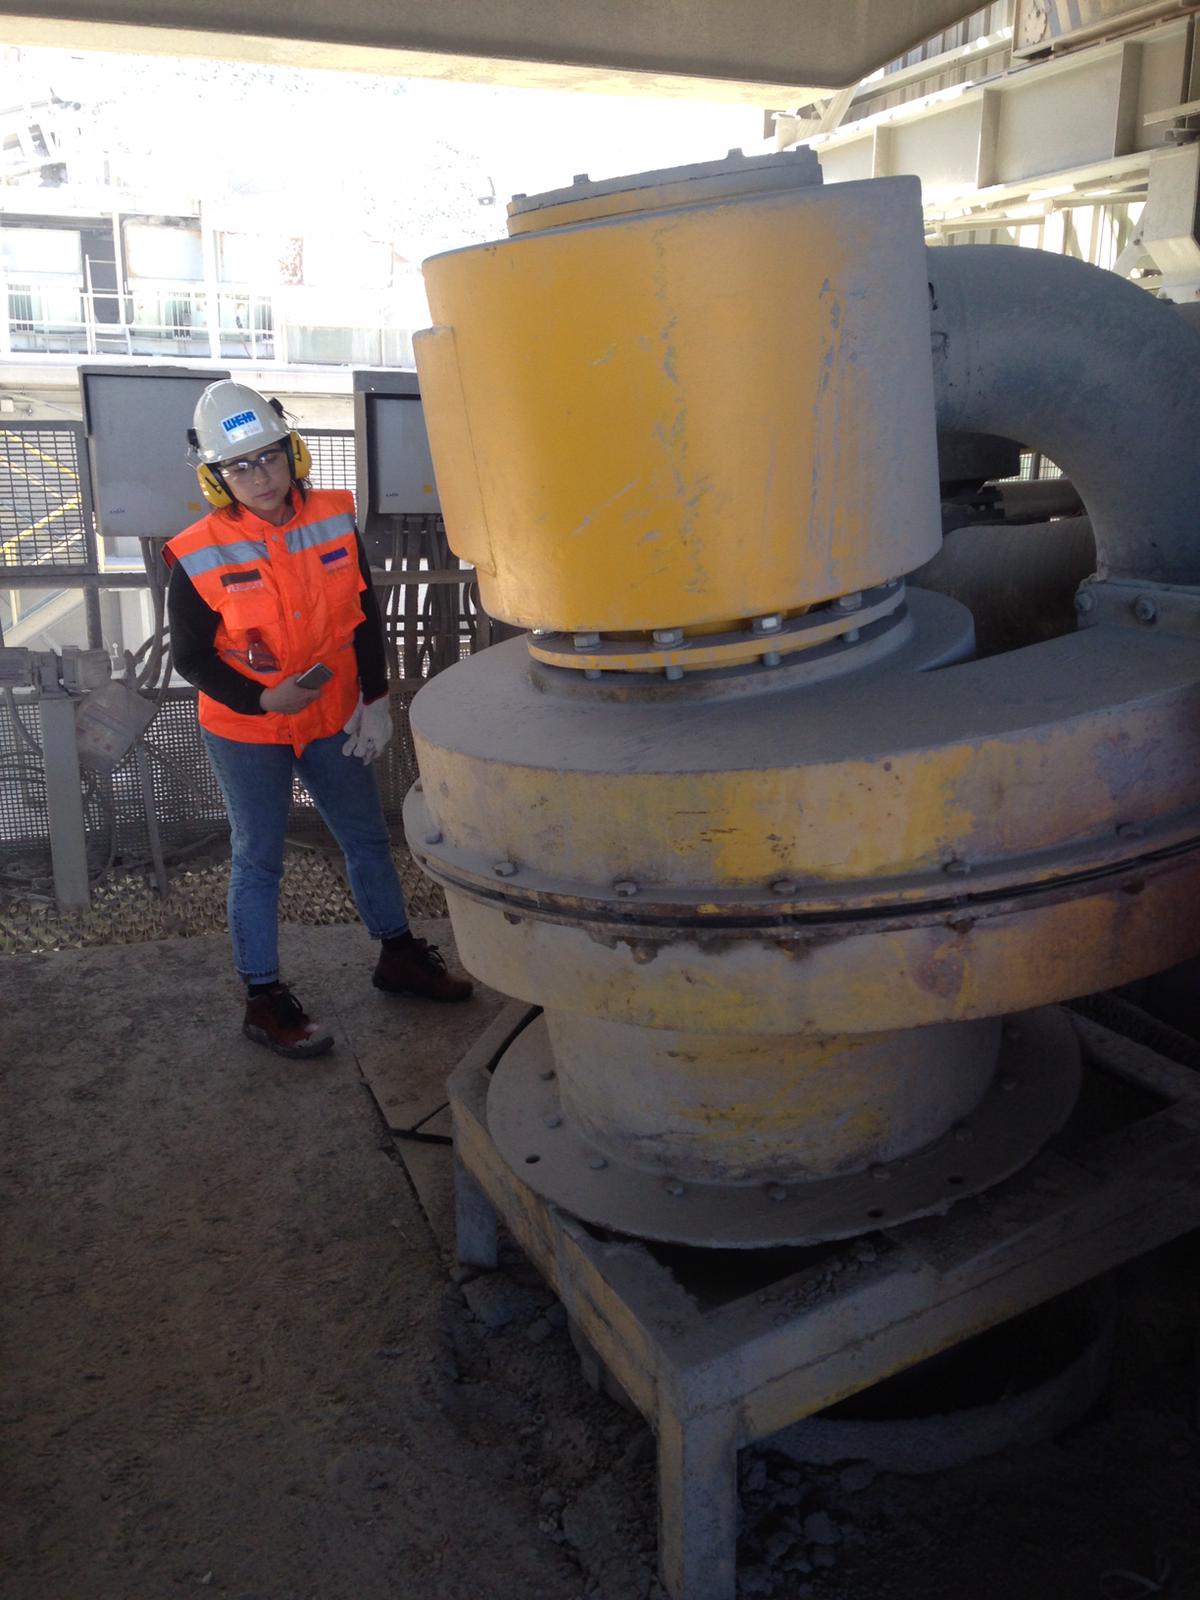 PhD student Ashlee Espinoza viewing a hydro-cyclone at Weir Group's facility in Santiago, Chile